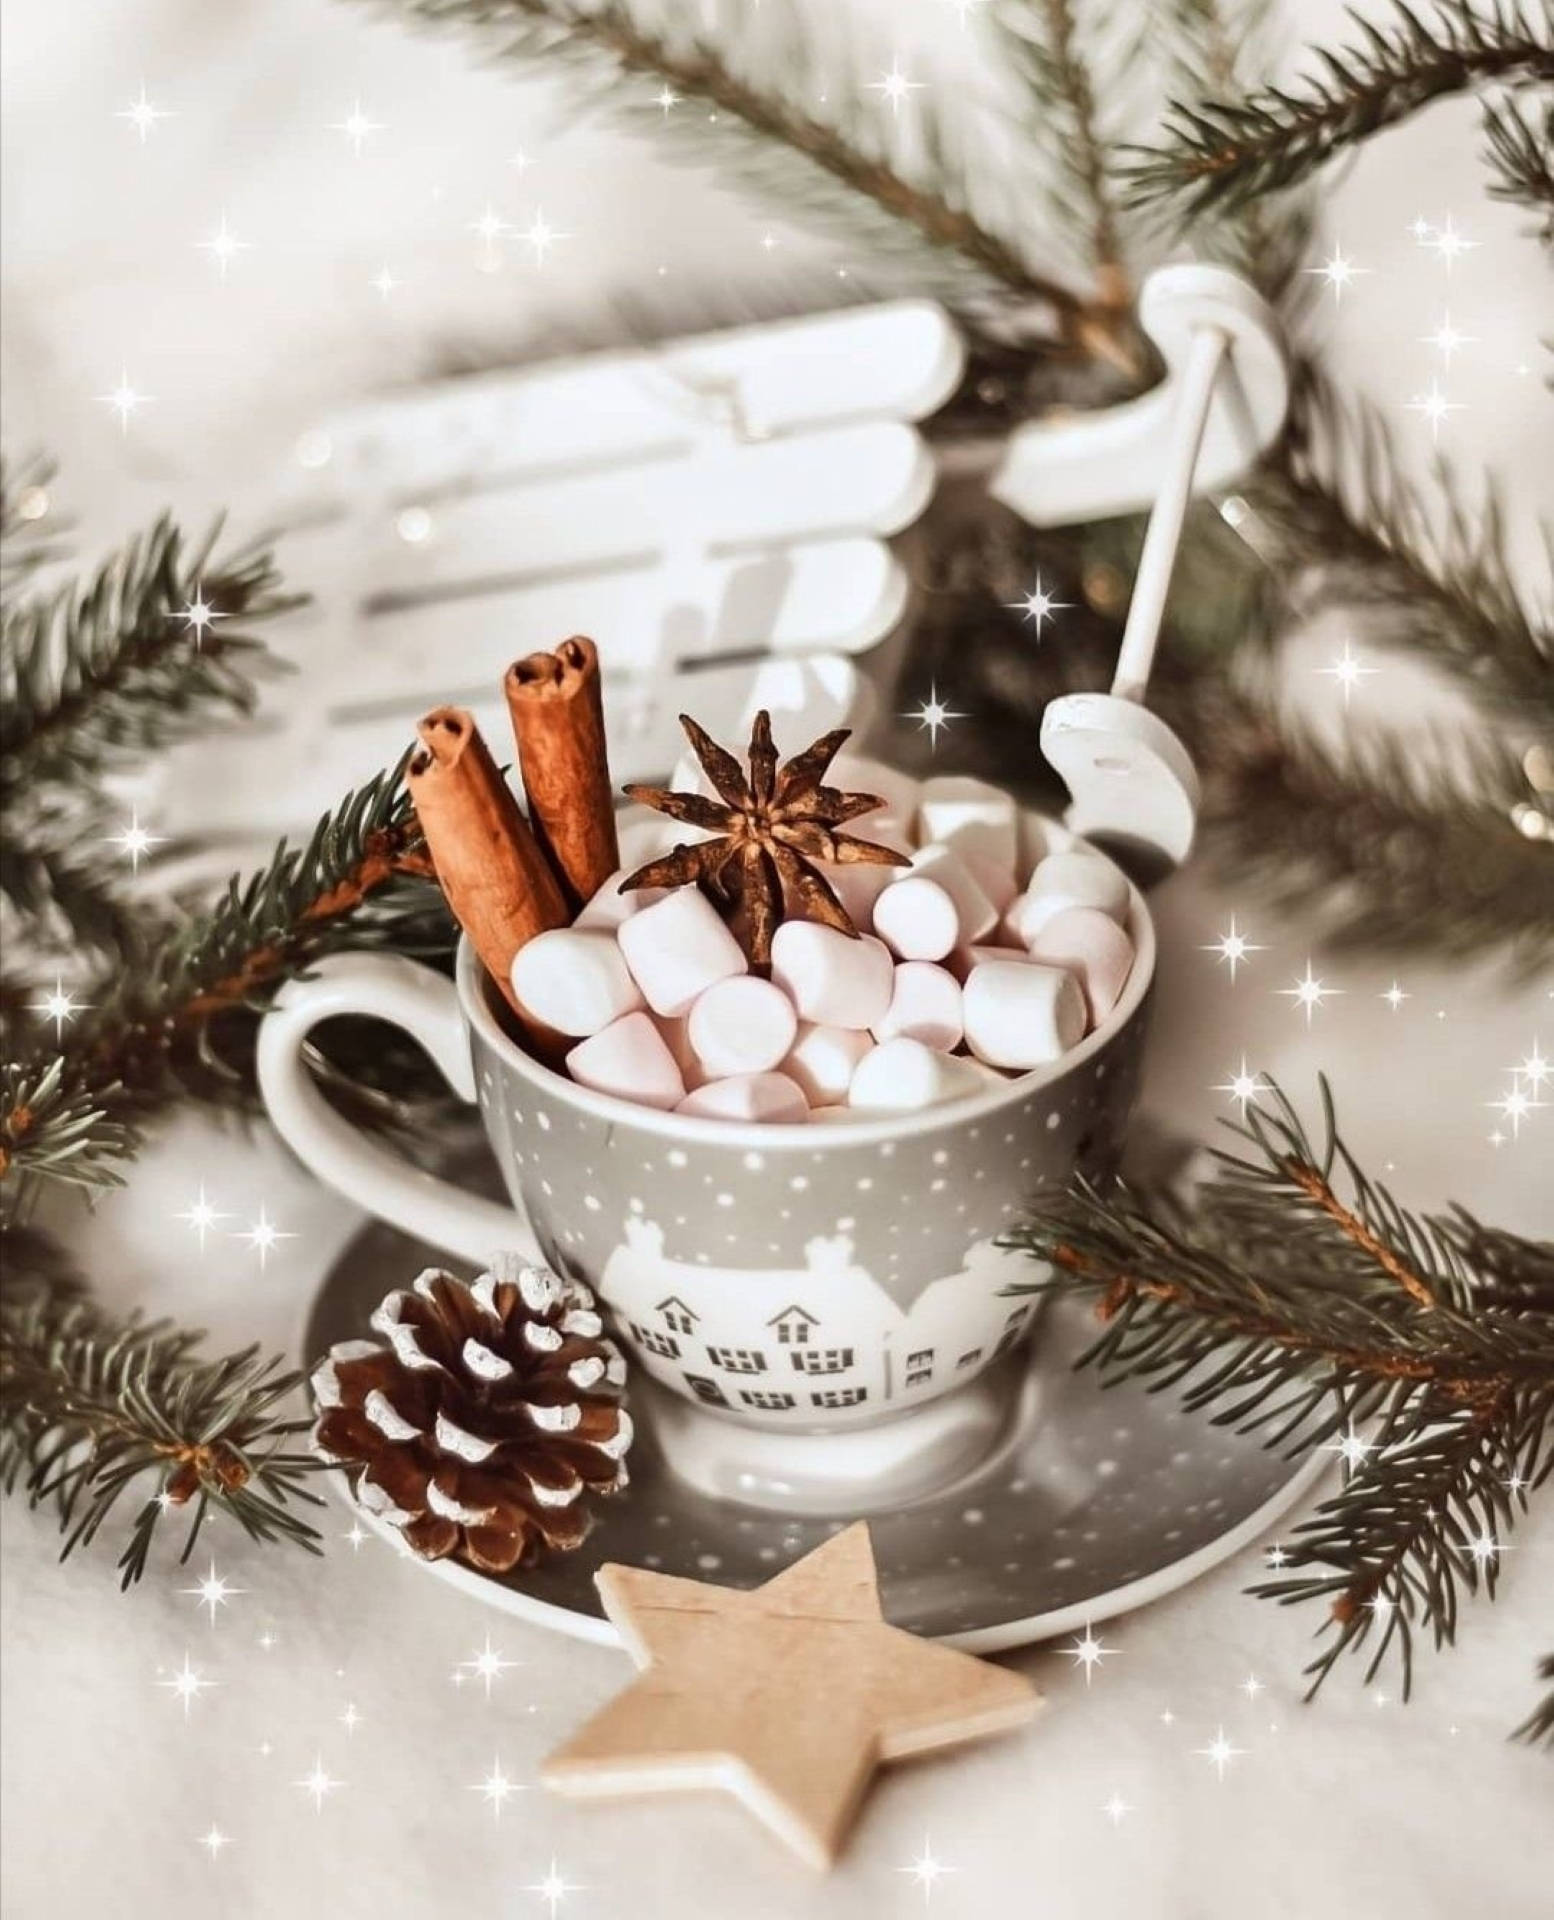 A cup of hot chocolate with marshmallows, cinnamon sticks, and a pine cone. - White Christmas, cute Christmas